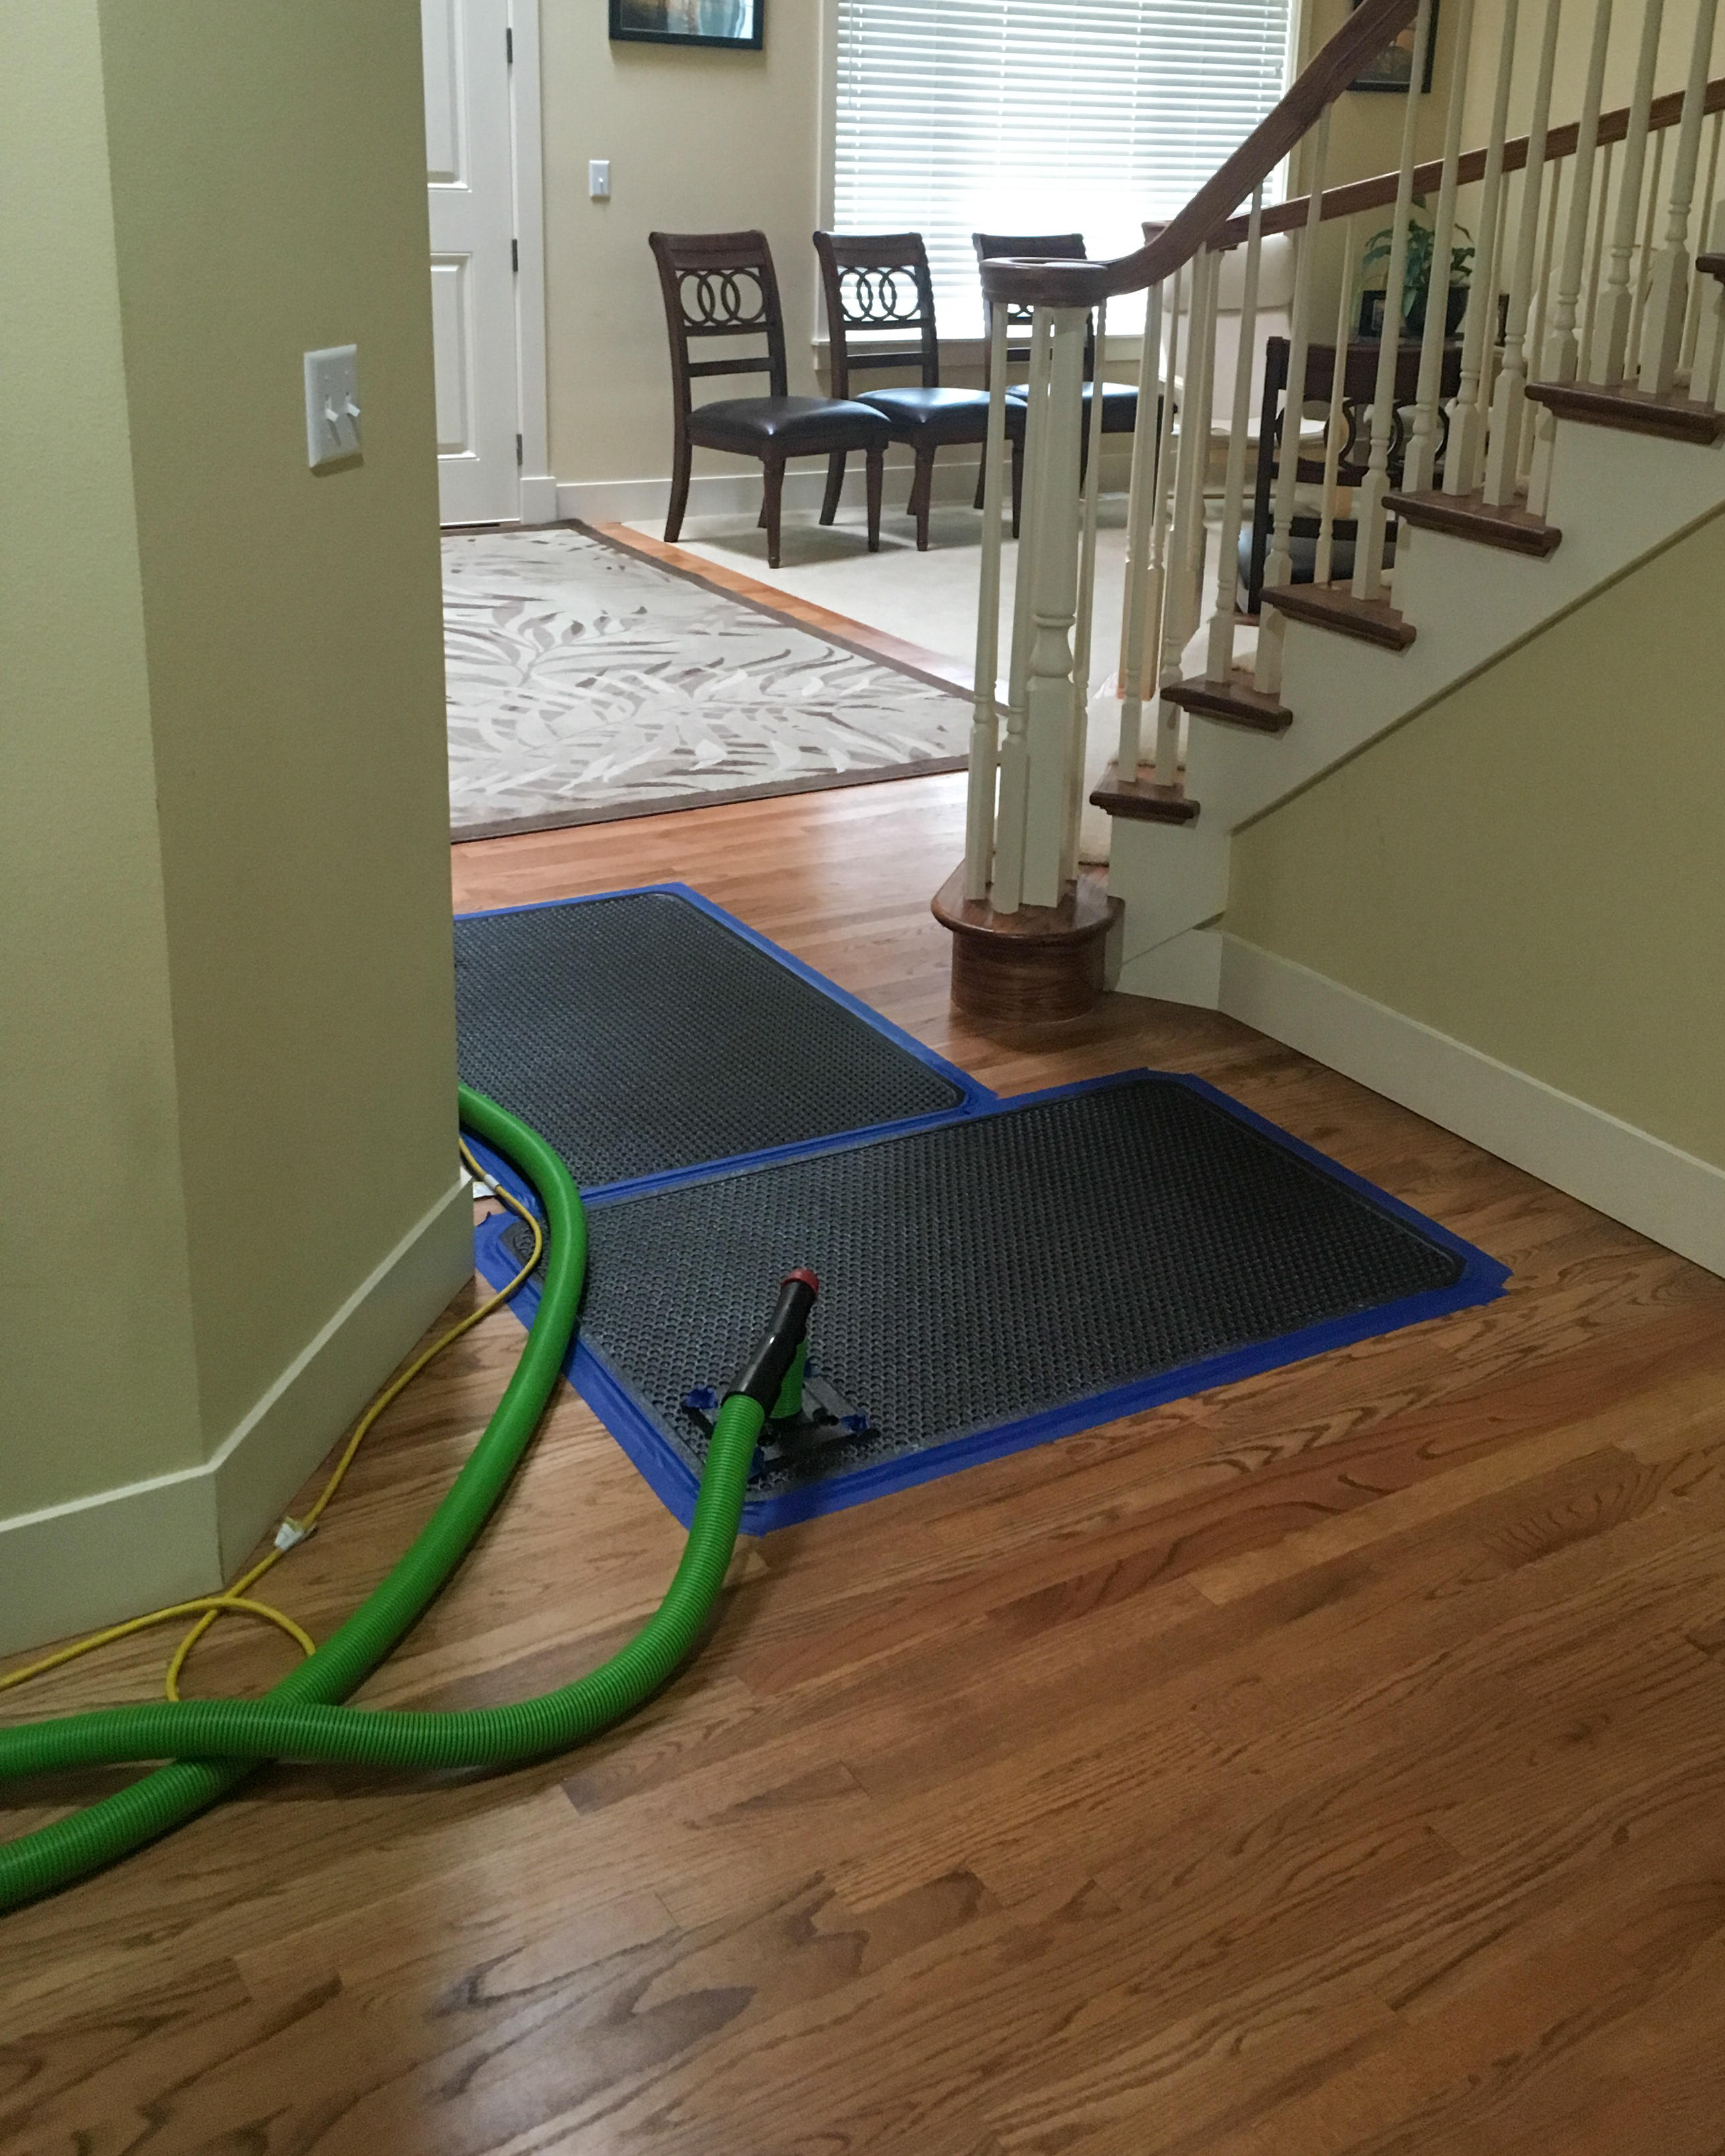 SERVPRO of Shoreline/Woodinville is always ready to respond to your water damage restoration in North City, WA. Our team has the expertise to handle any size disaster. We are a call away to help!